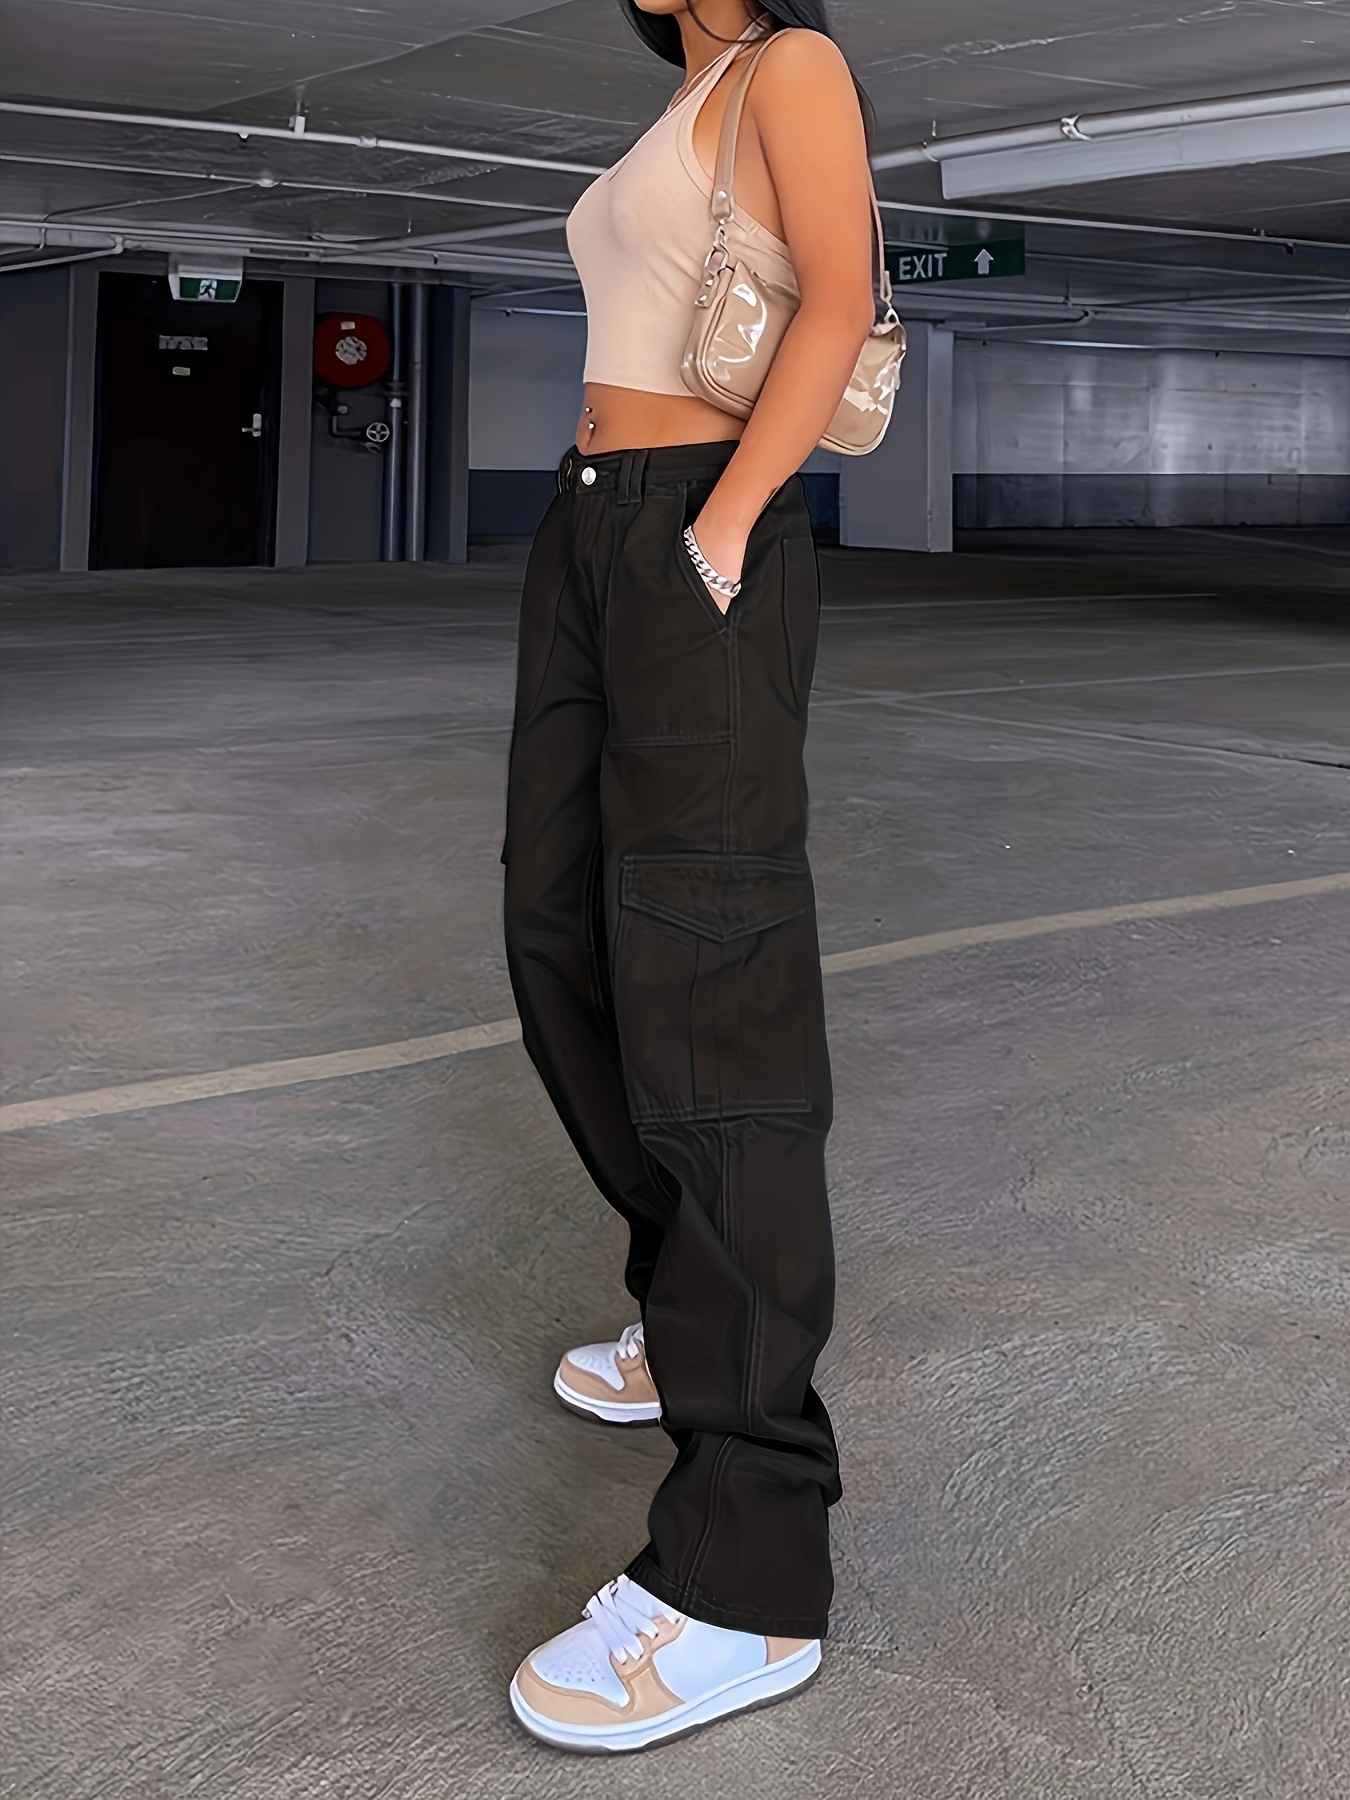 53 Best Cargo Pants Outfit Ideas  cargo pants outfit, fashion, pants outfit